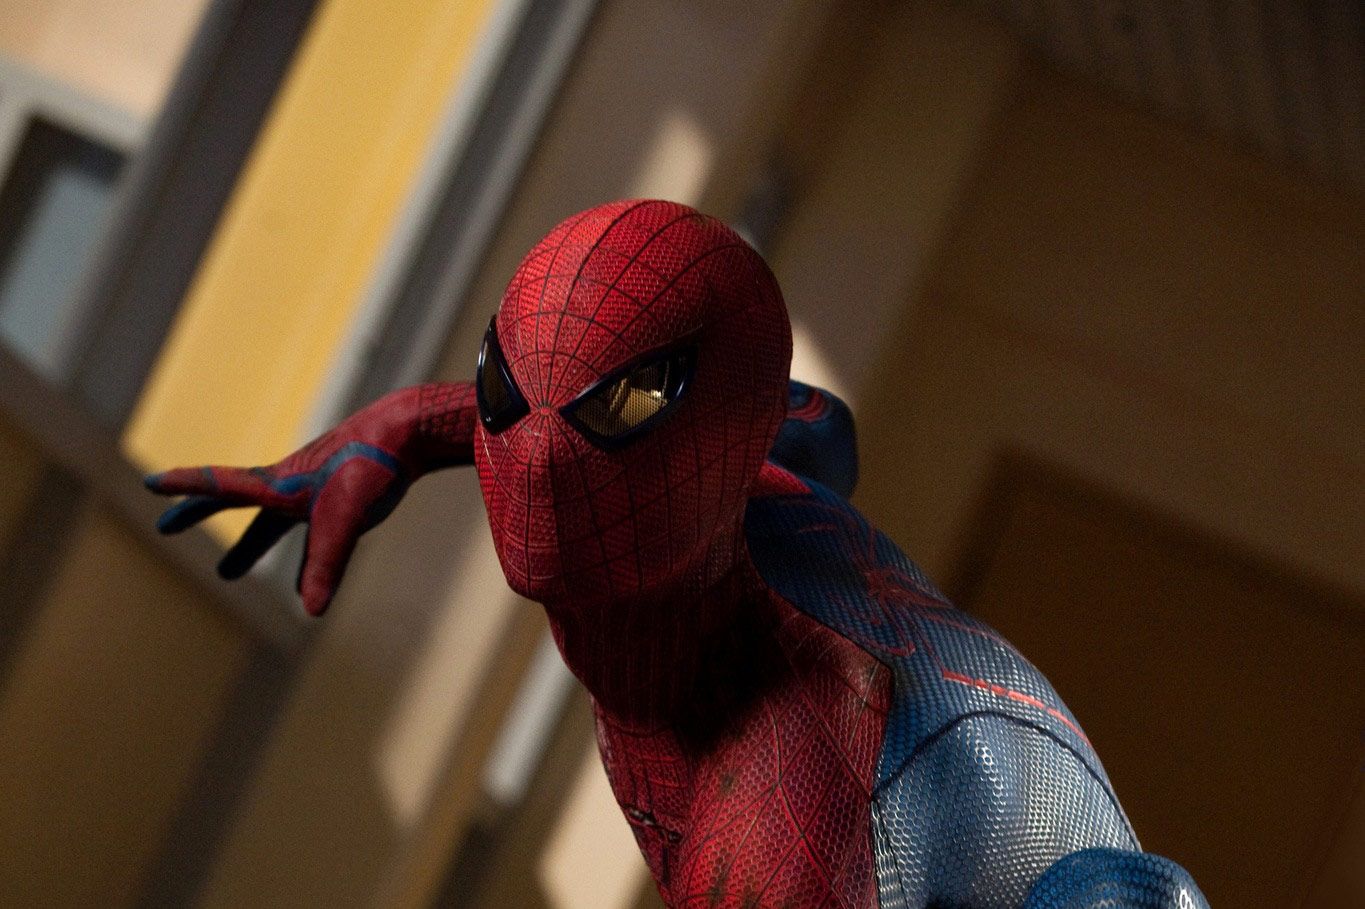 Spider-Man 2 Shows Why Theatrical Cuts Are Usually Better Than Extended